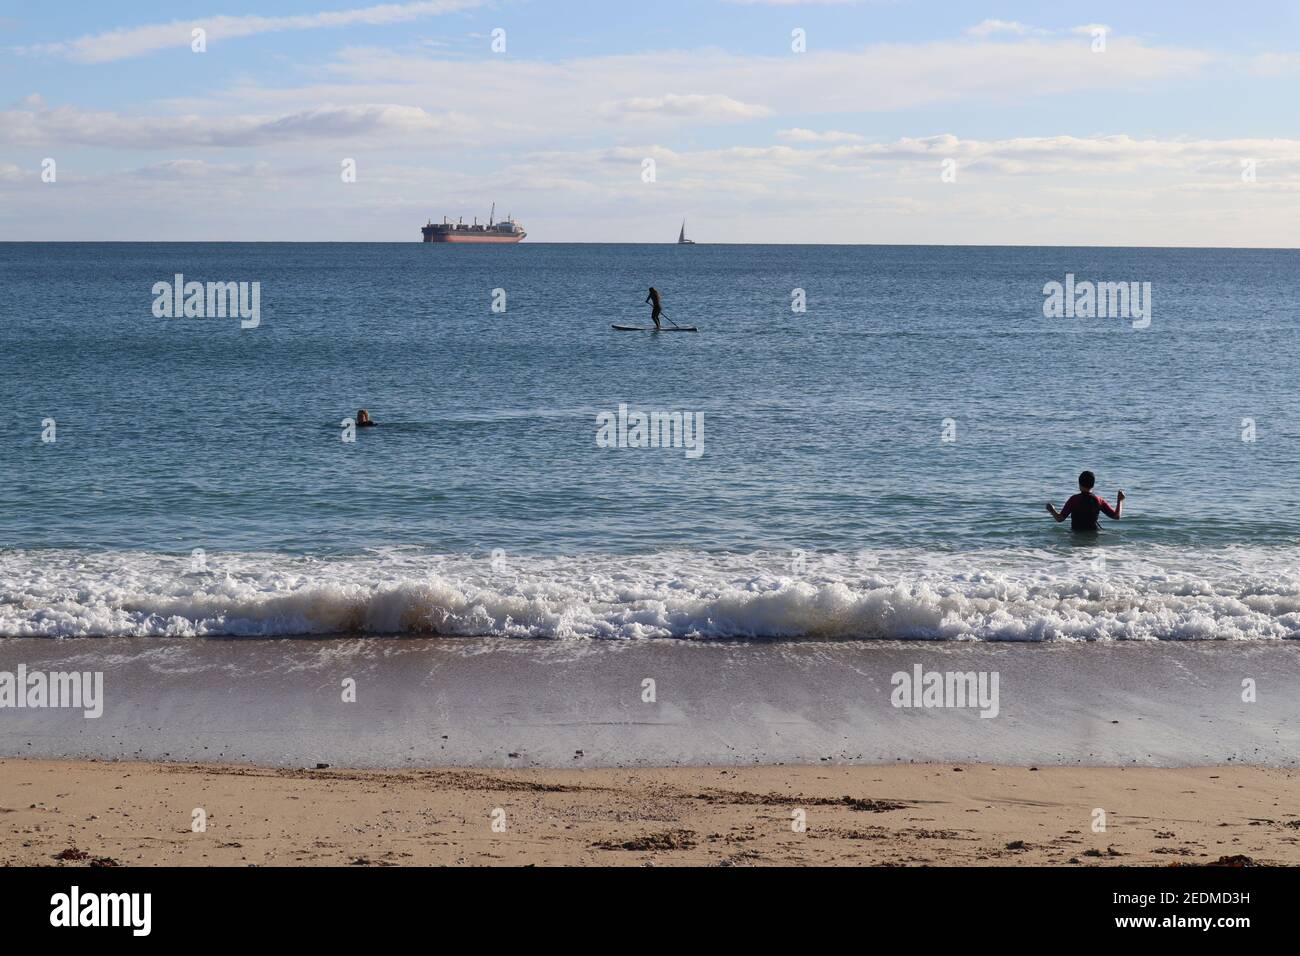 Falmouth seafront Gyllyngvase Beach, winter sunshine during lockdown, living a healthy life Stock Photo